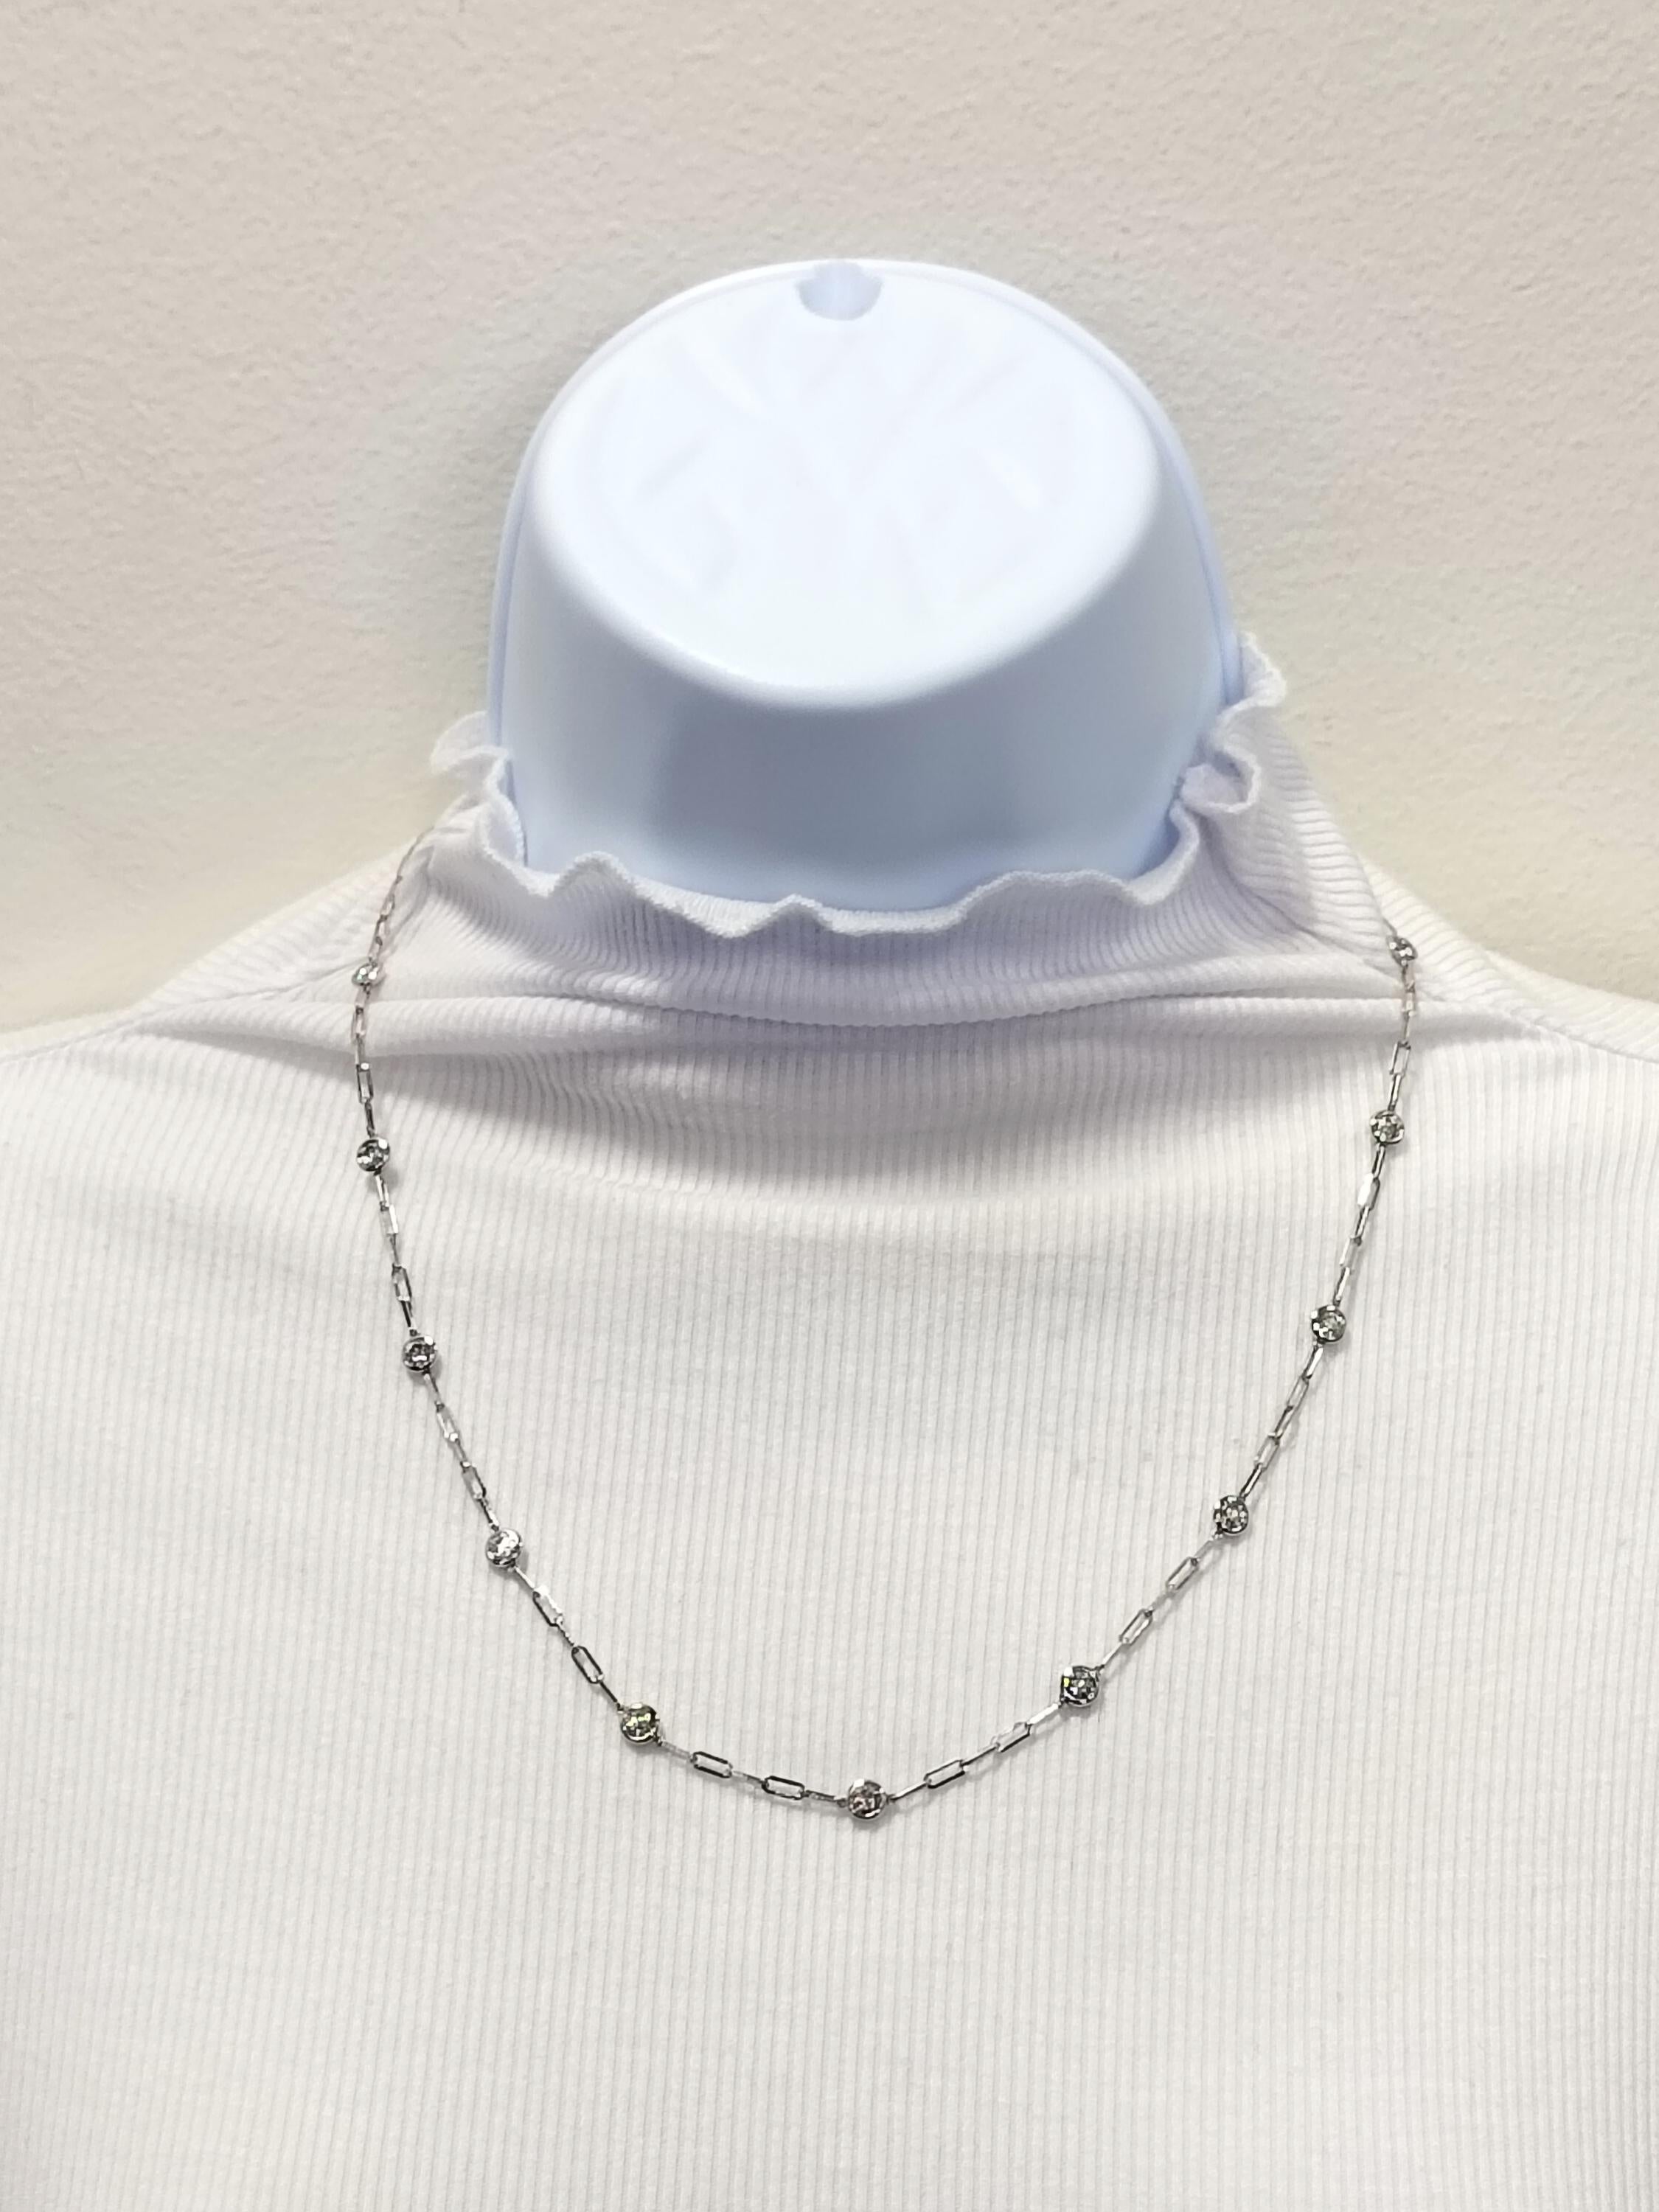 Beautiful paperclip necklace with 2.10 ct. good quality white diamond rounds.  Handmade in 14k white gold.  Length is 20